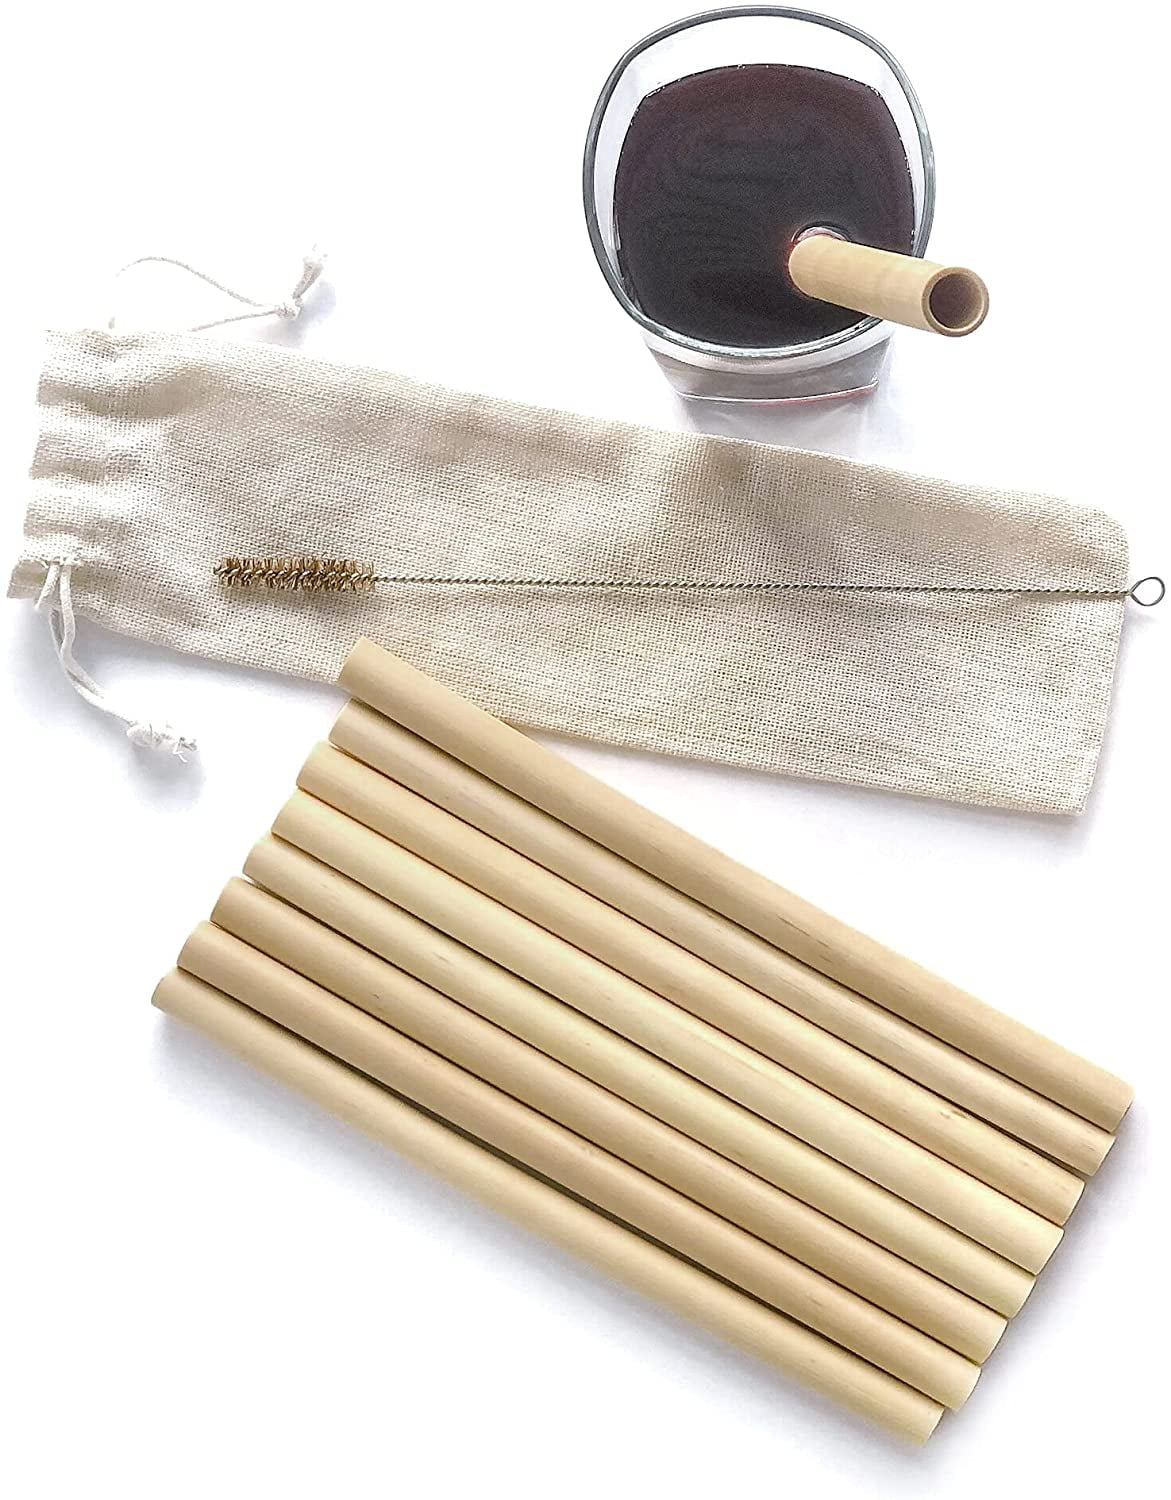 Straws Reusable Reusable Eco Friendly Drinking Straw Set Biodegradable and Organic Healthy Very Sturdy Eco Friendly Drinking Straw Ideal for Party Water Juice Bubble Tea Cocktail Smoothies Bamboo